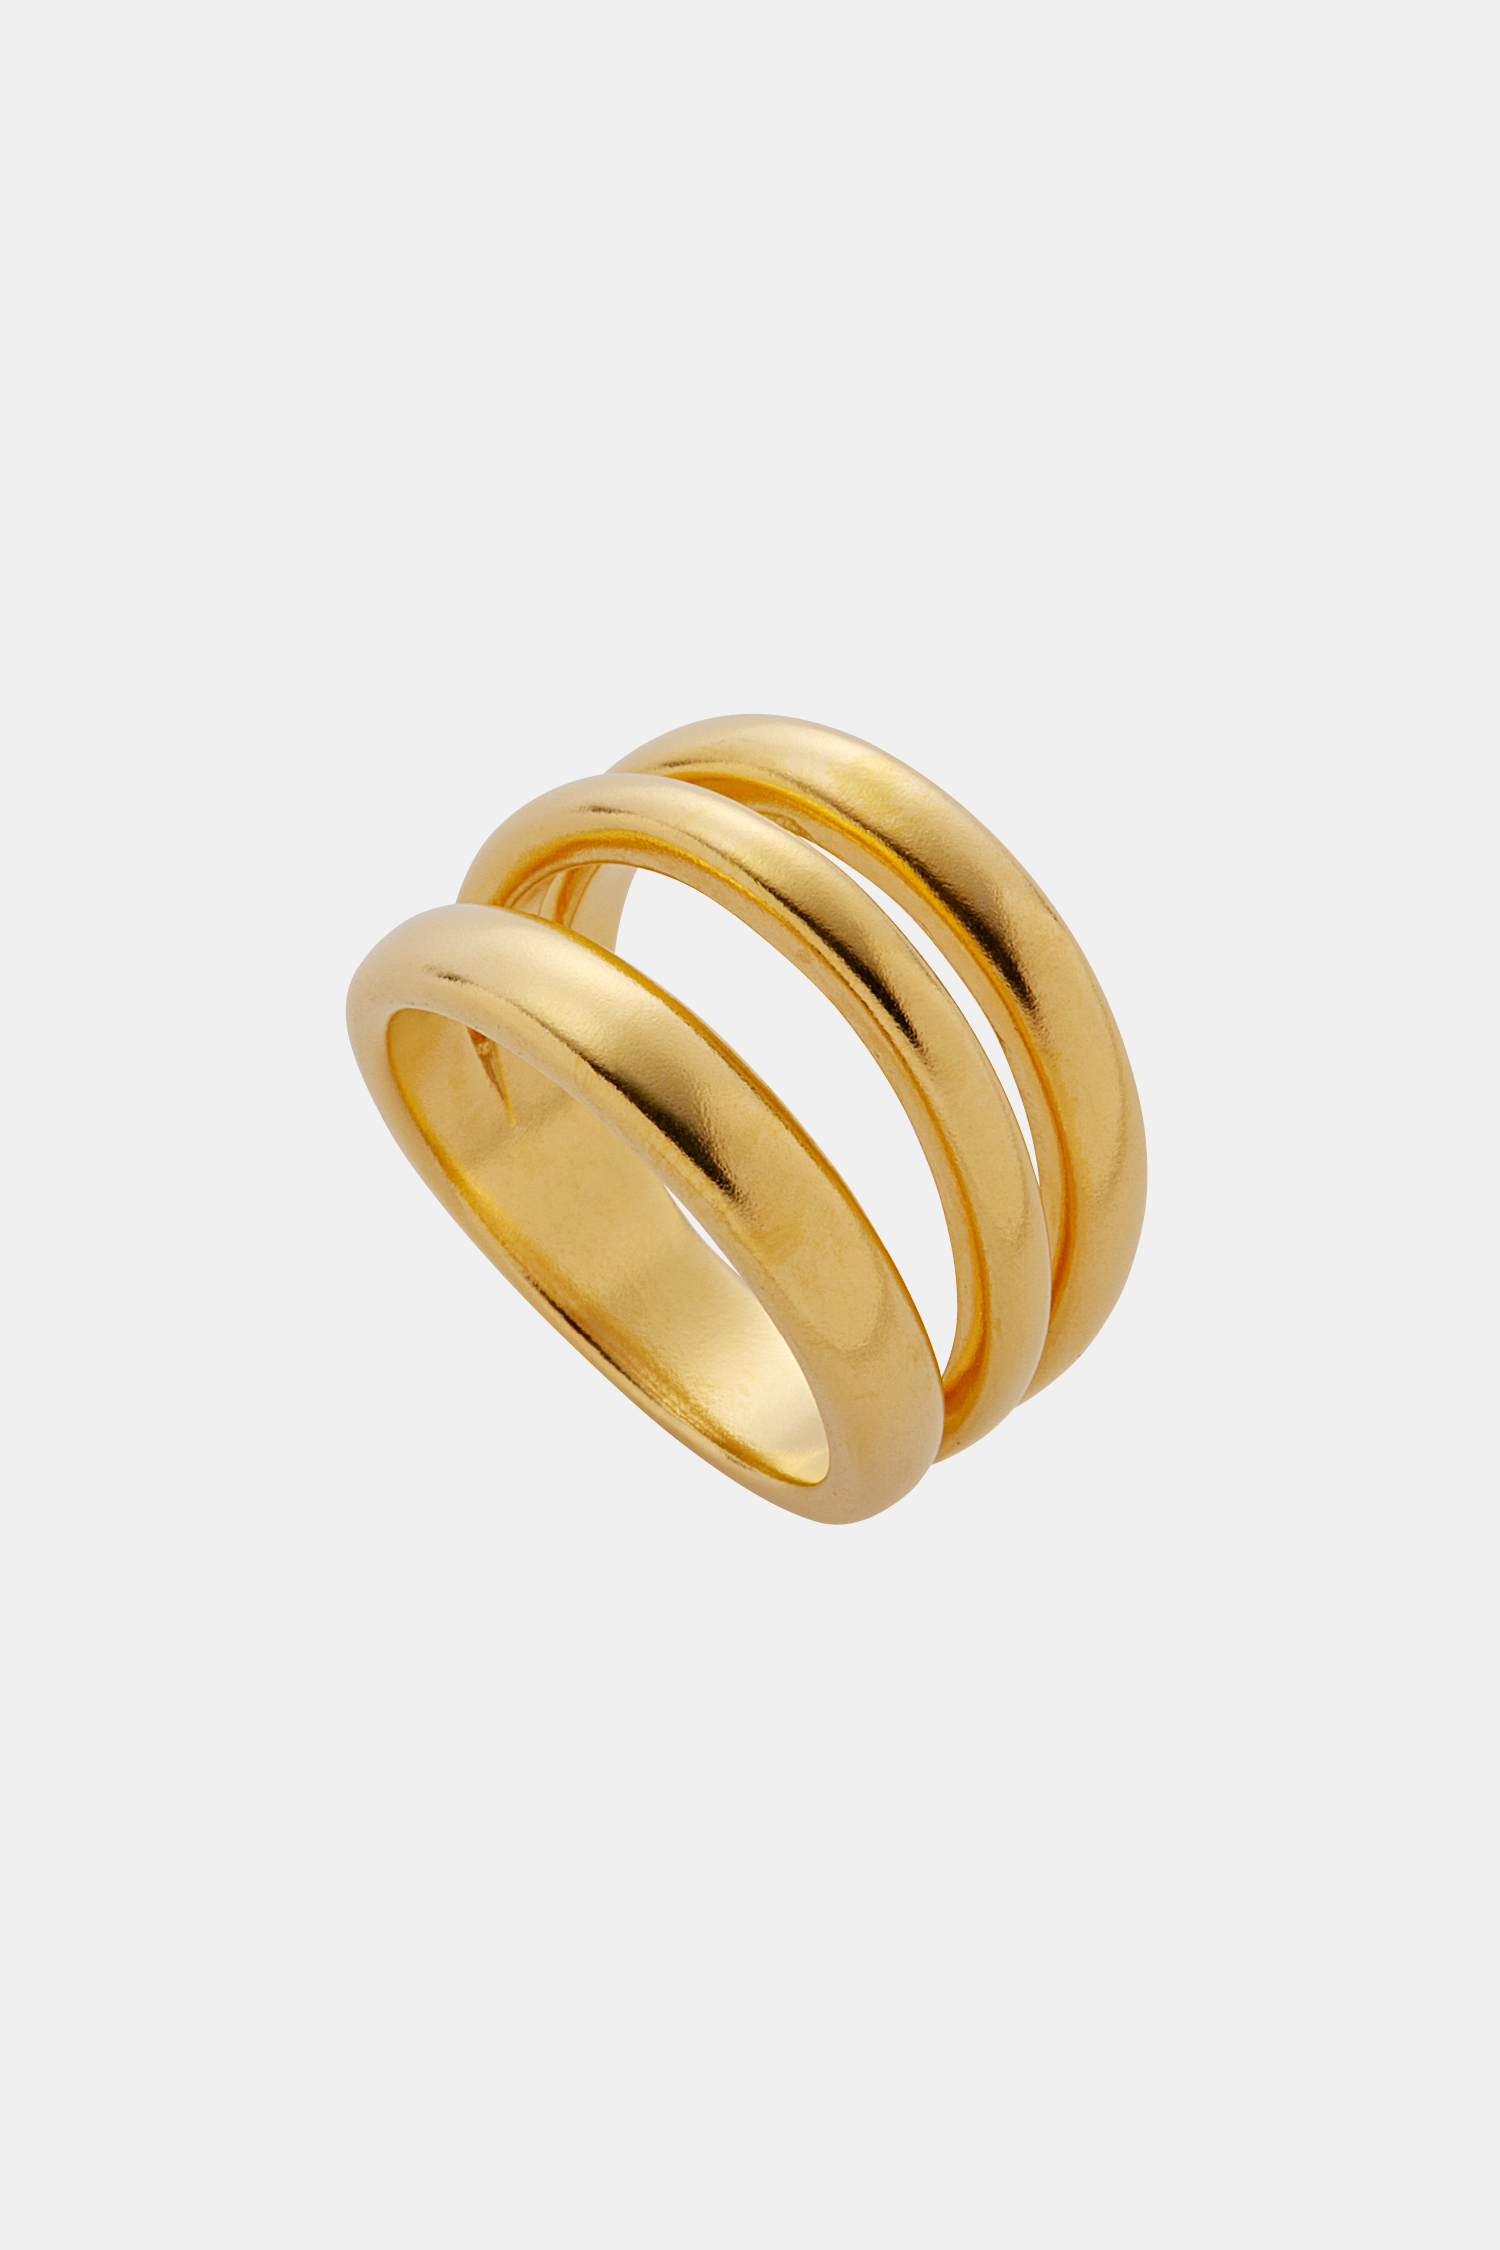 Copain Ring 0.3ct | pensees-jewelry